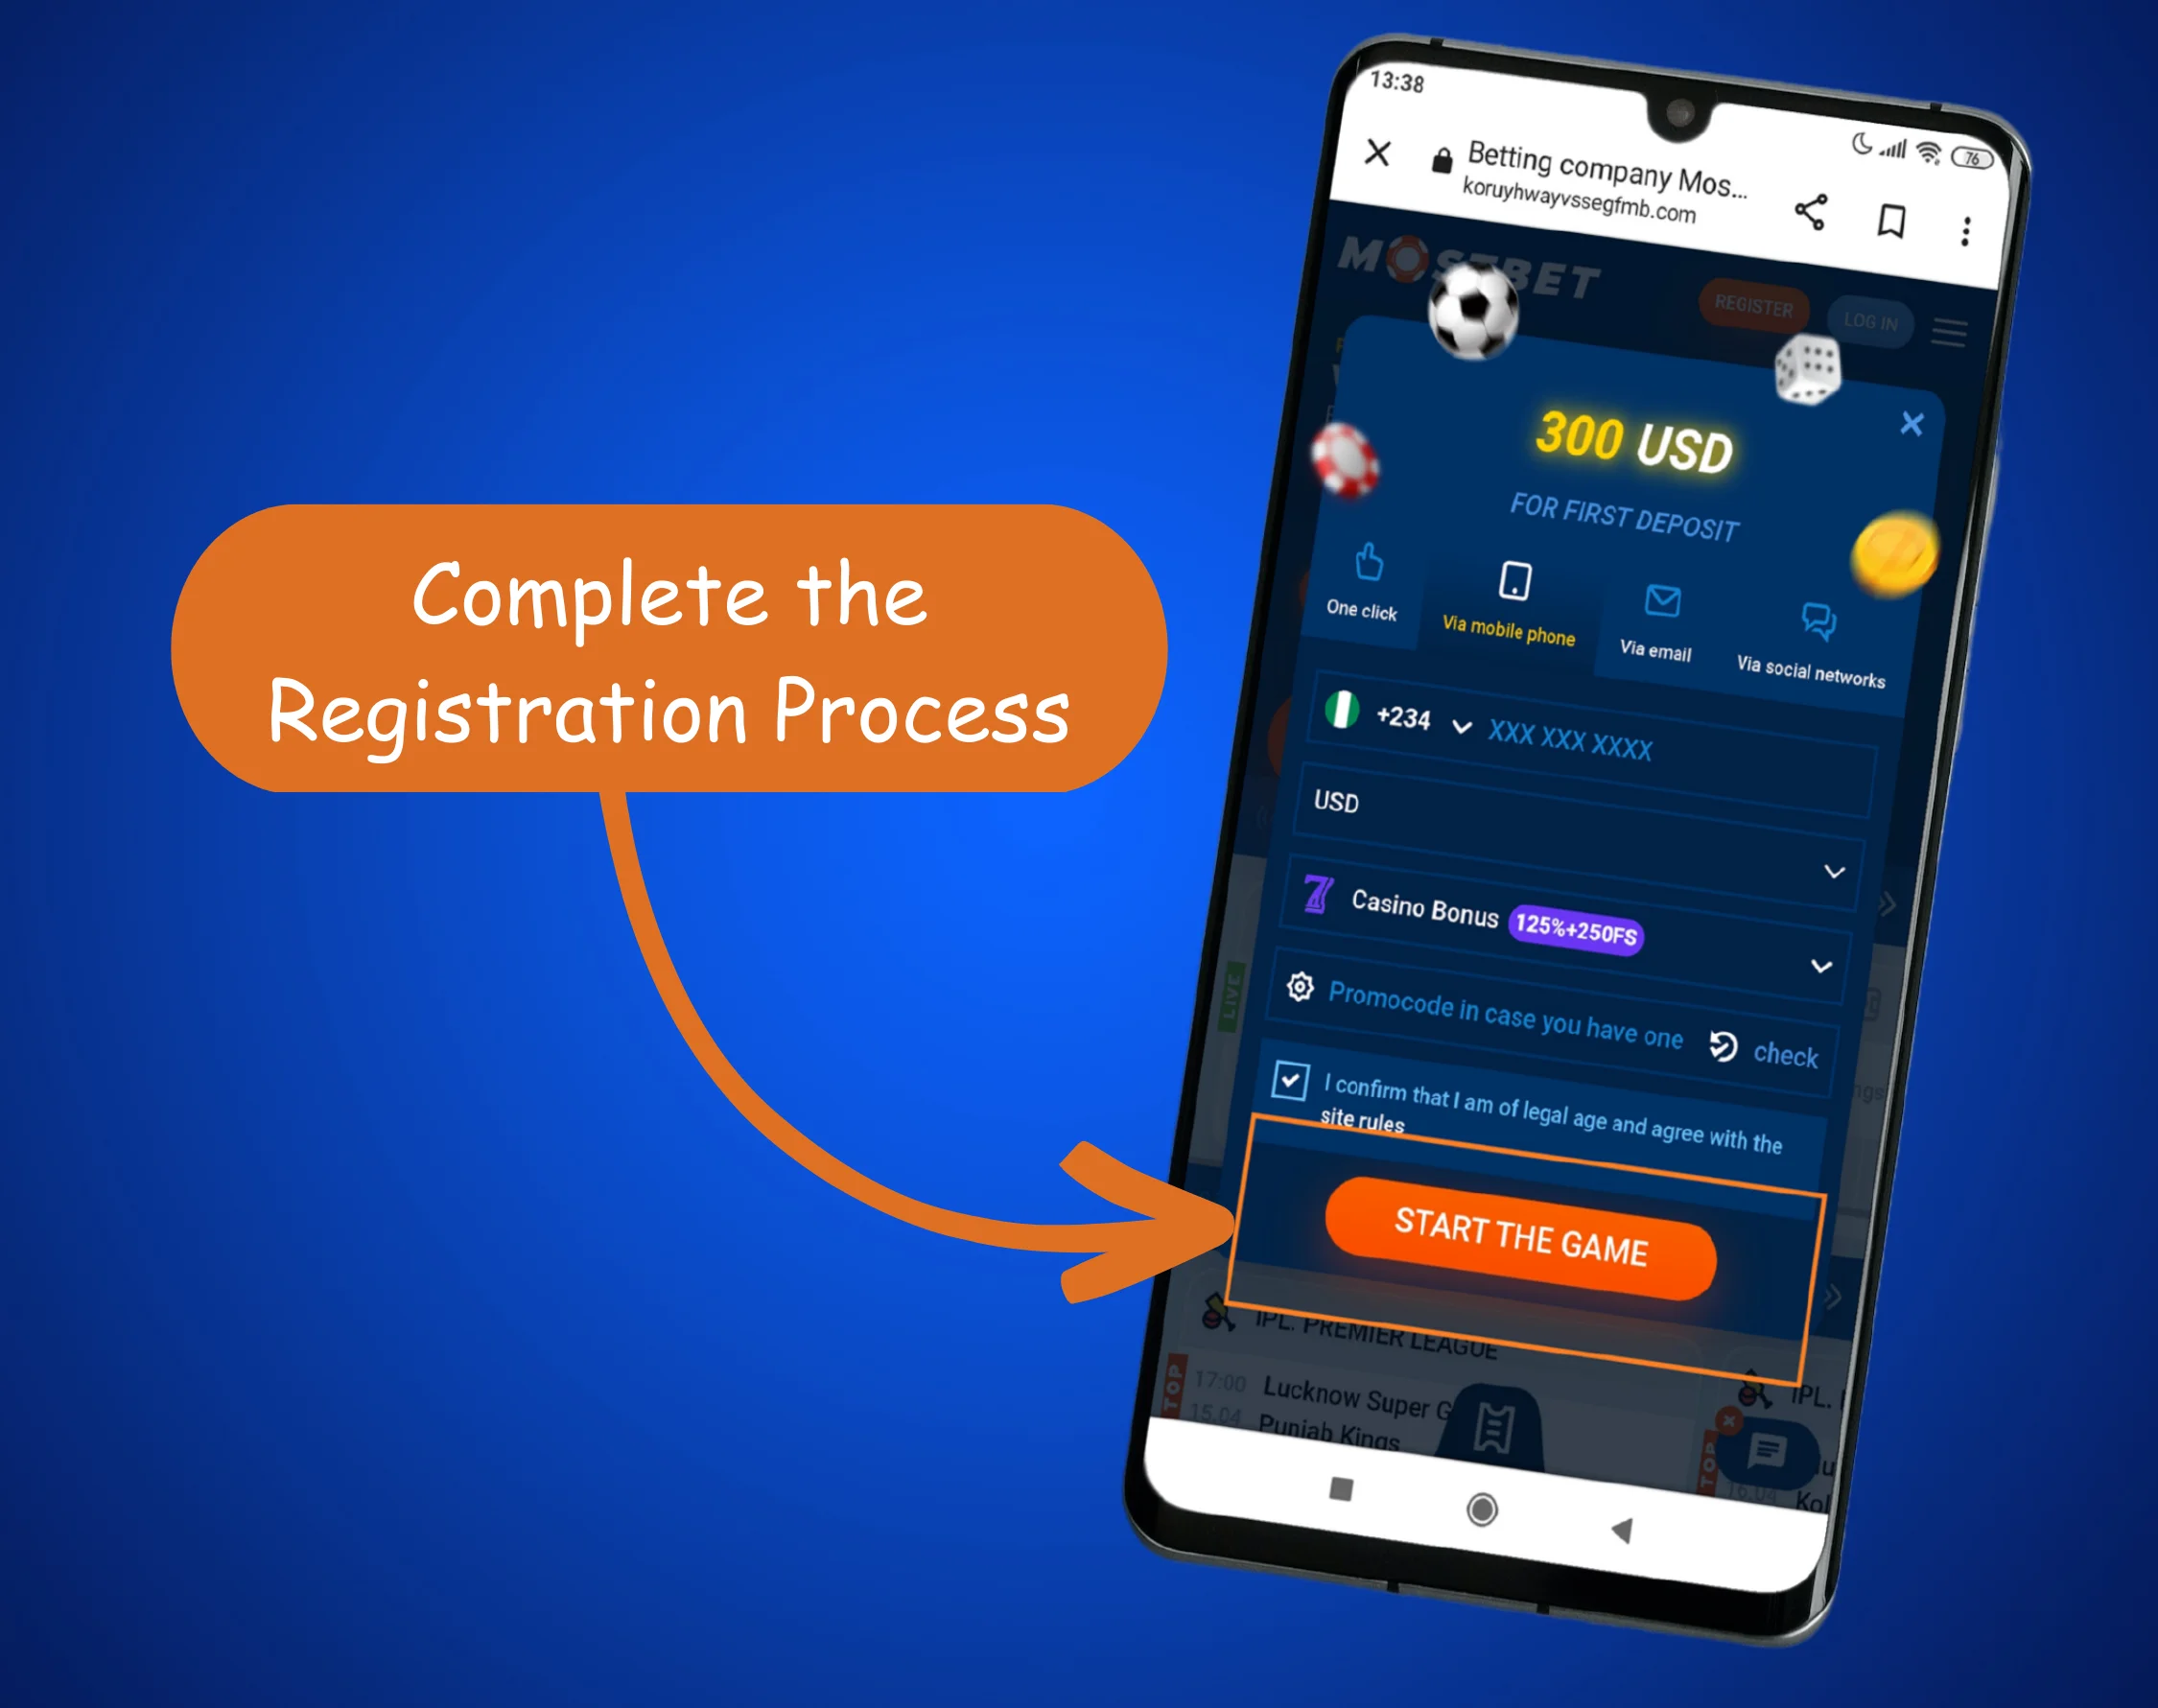 Complete the Registration Process